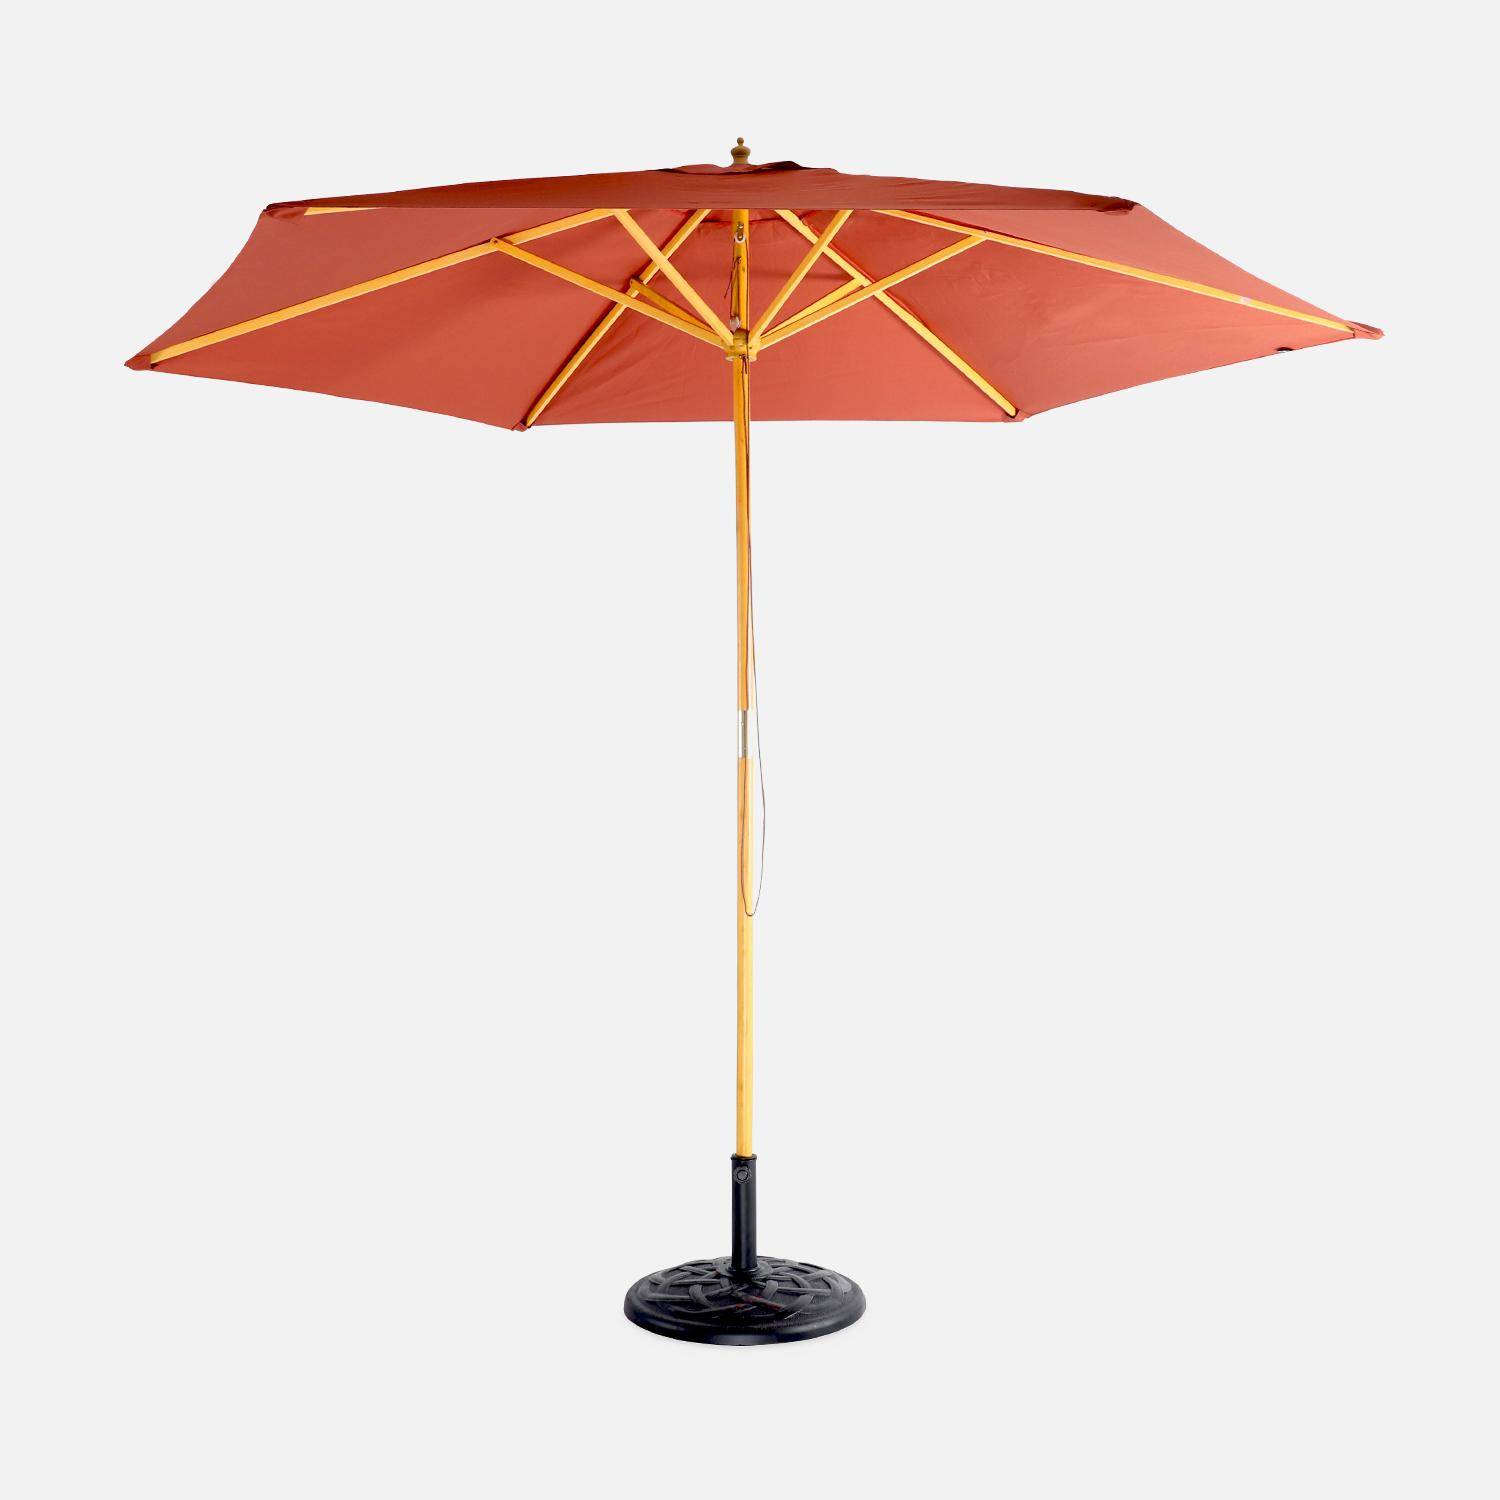 Round wooden parasol Ø300cm with straight pole -  adjustable aluminium central mast in wood and crank handle opening - Cabourg - Terracotta,sweeek,Photo1